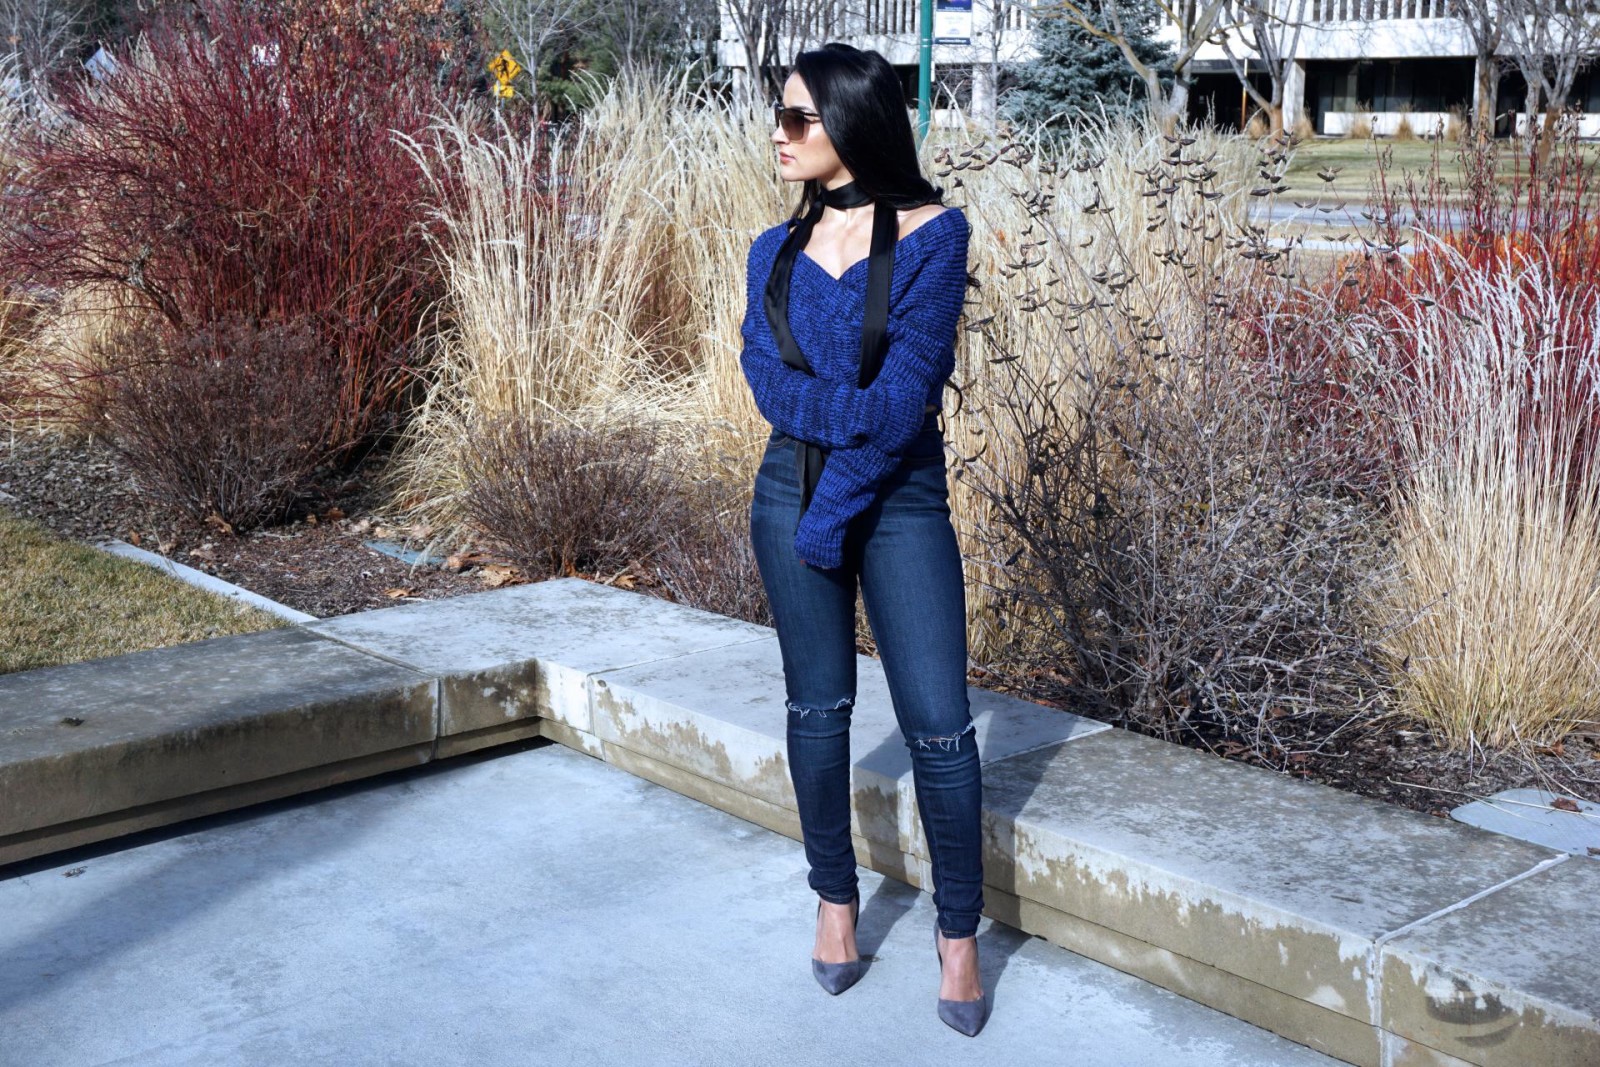 SheIn.com, Blue Boat Neck Cross Front Crop Sweater, Satin Skinny Tie Scarf, URBAN OUTFITTERS, STEVE MADDEN SUEDE GREY PUMPS, ROYAL BLUE, NECESSARY CLOTHING JEANS